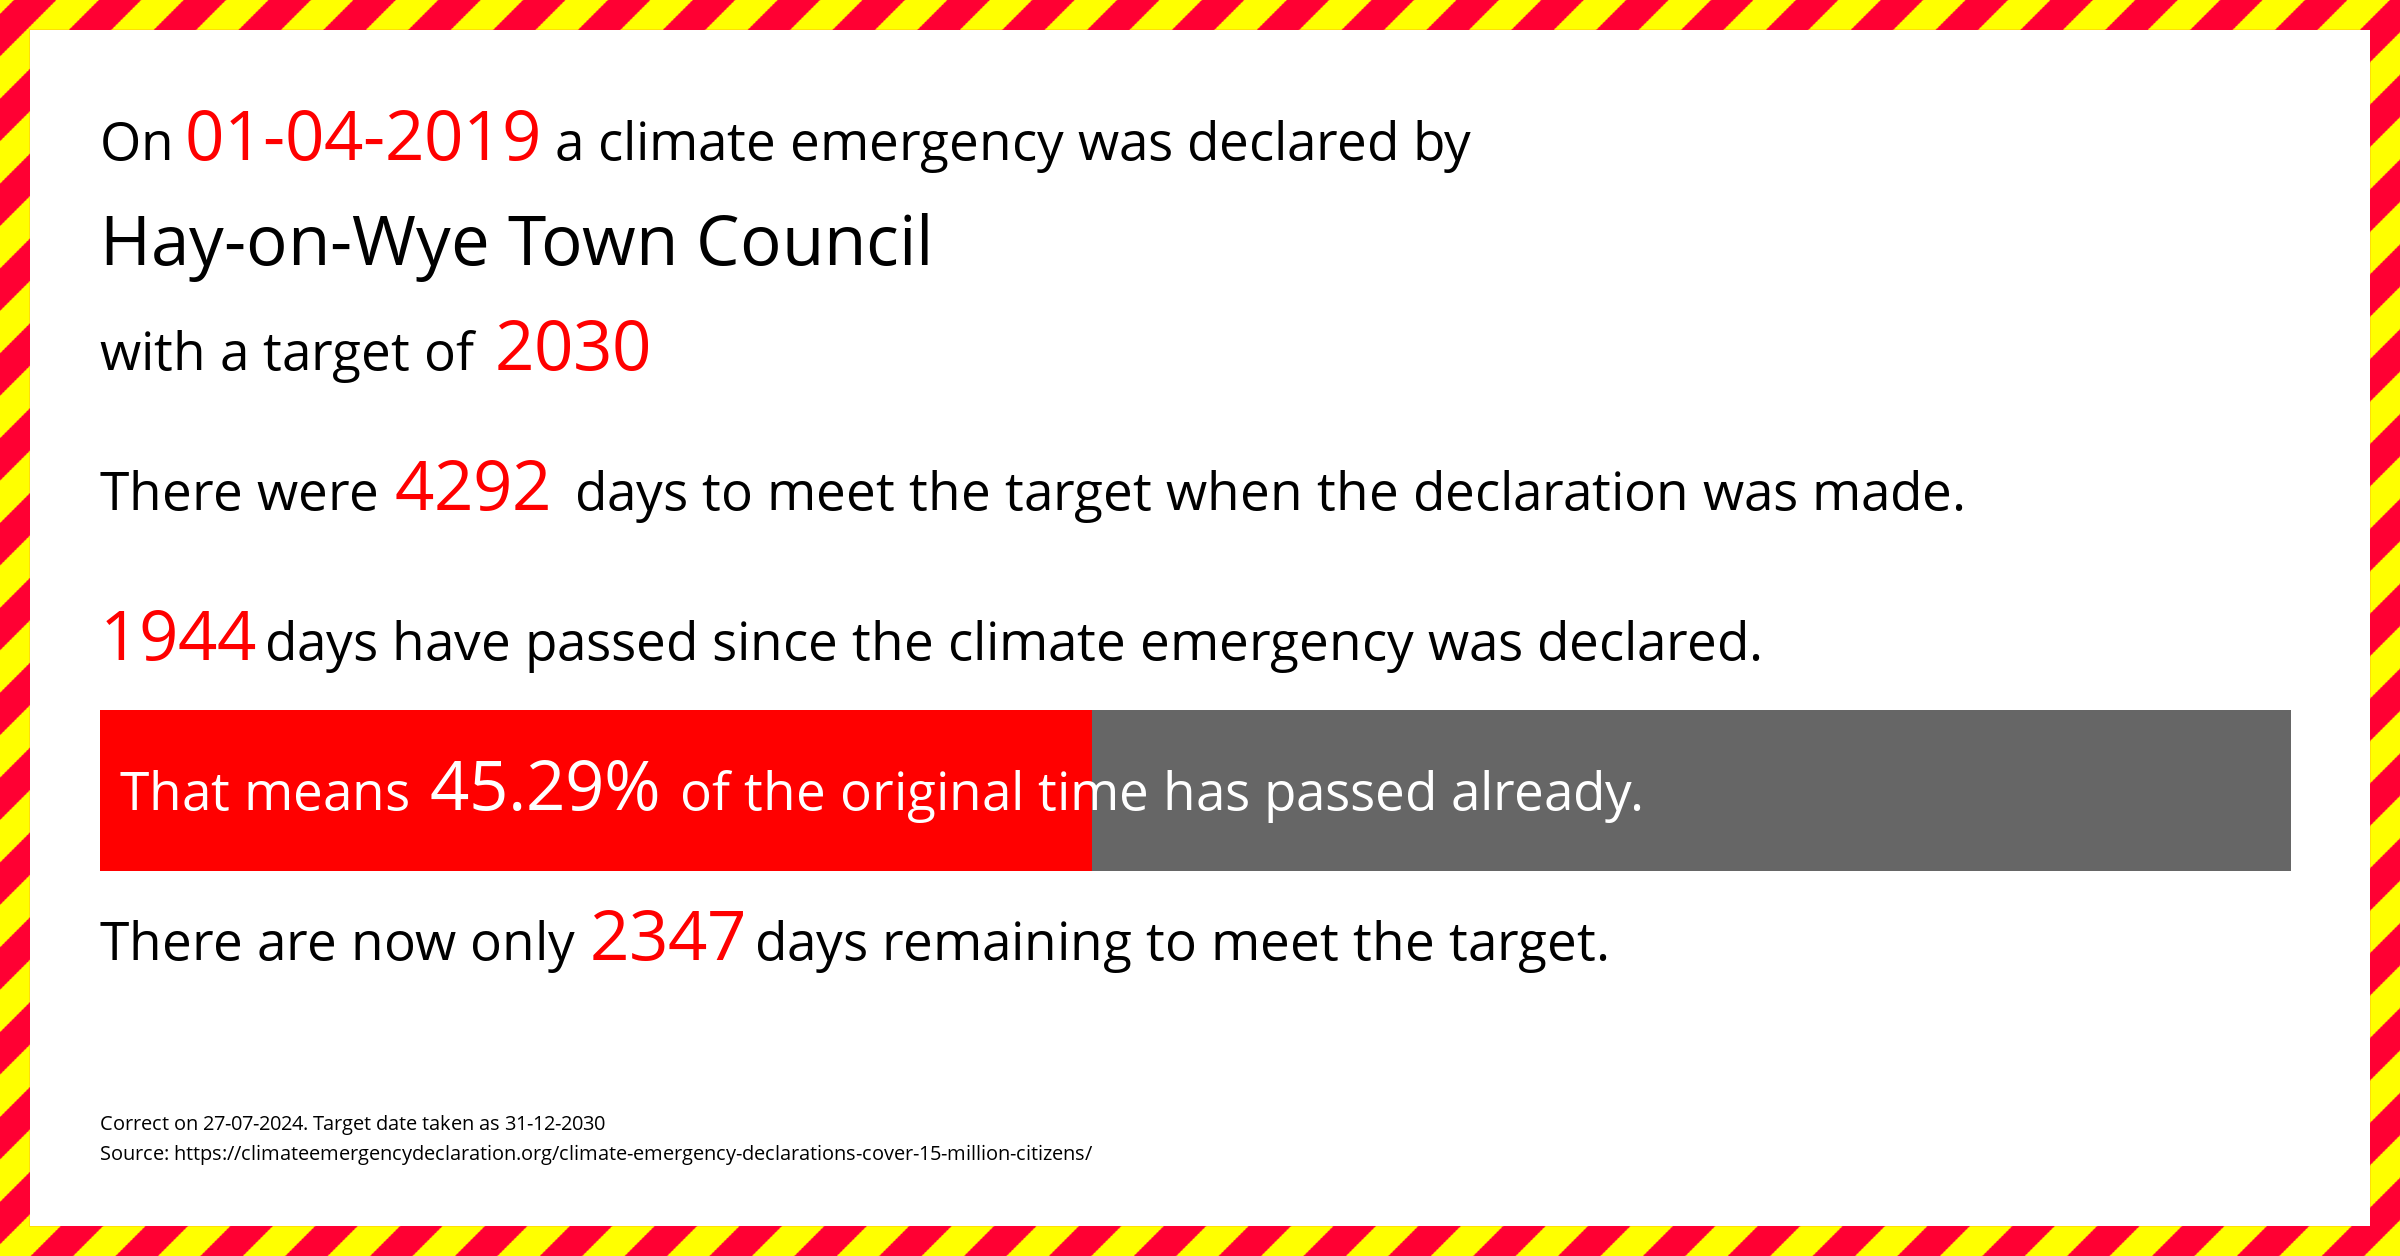 Hay-on-Wye Town Council declared a Climate emergency on Monday 1st April 2019, with a target of 2030.